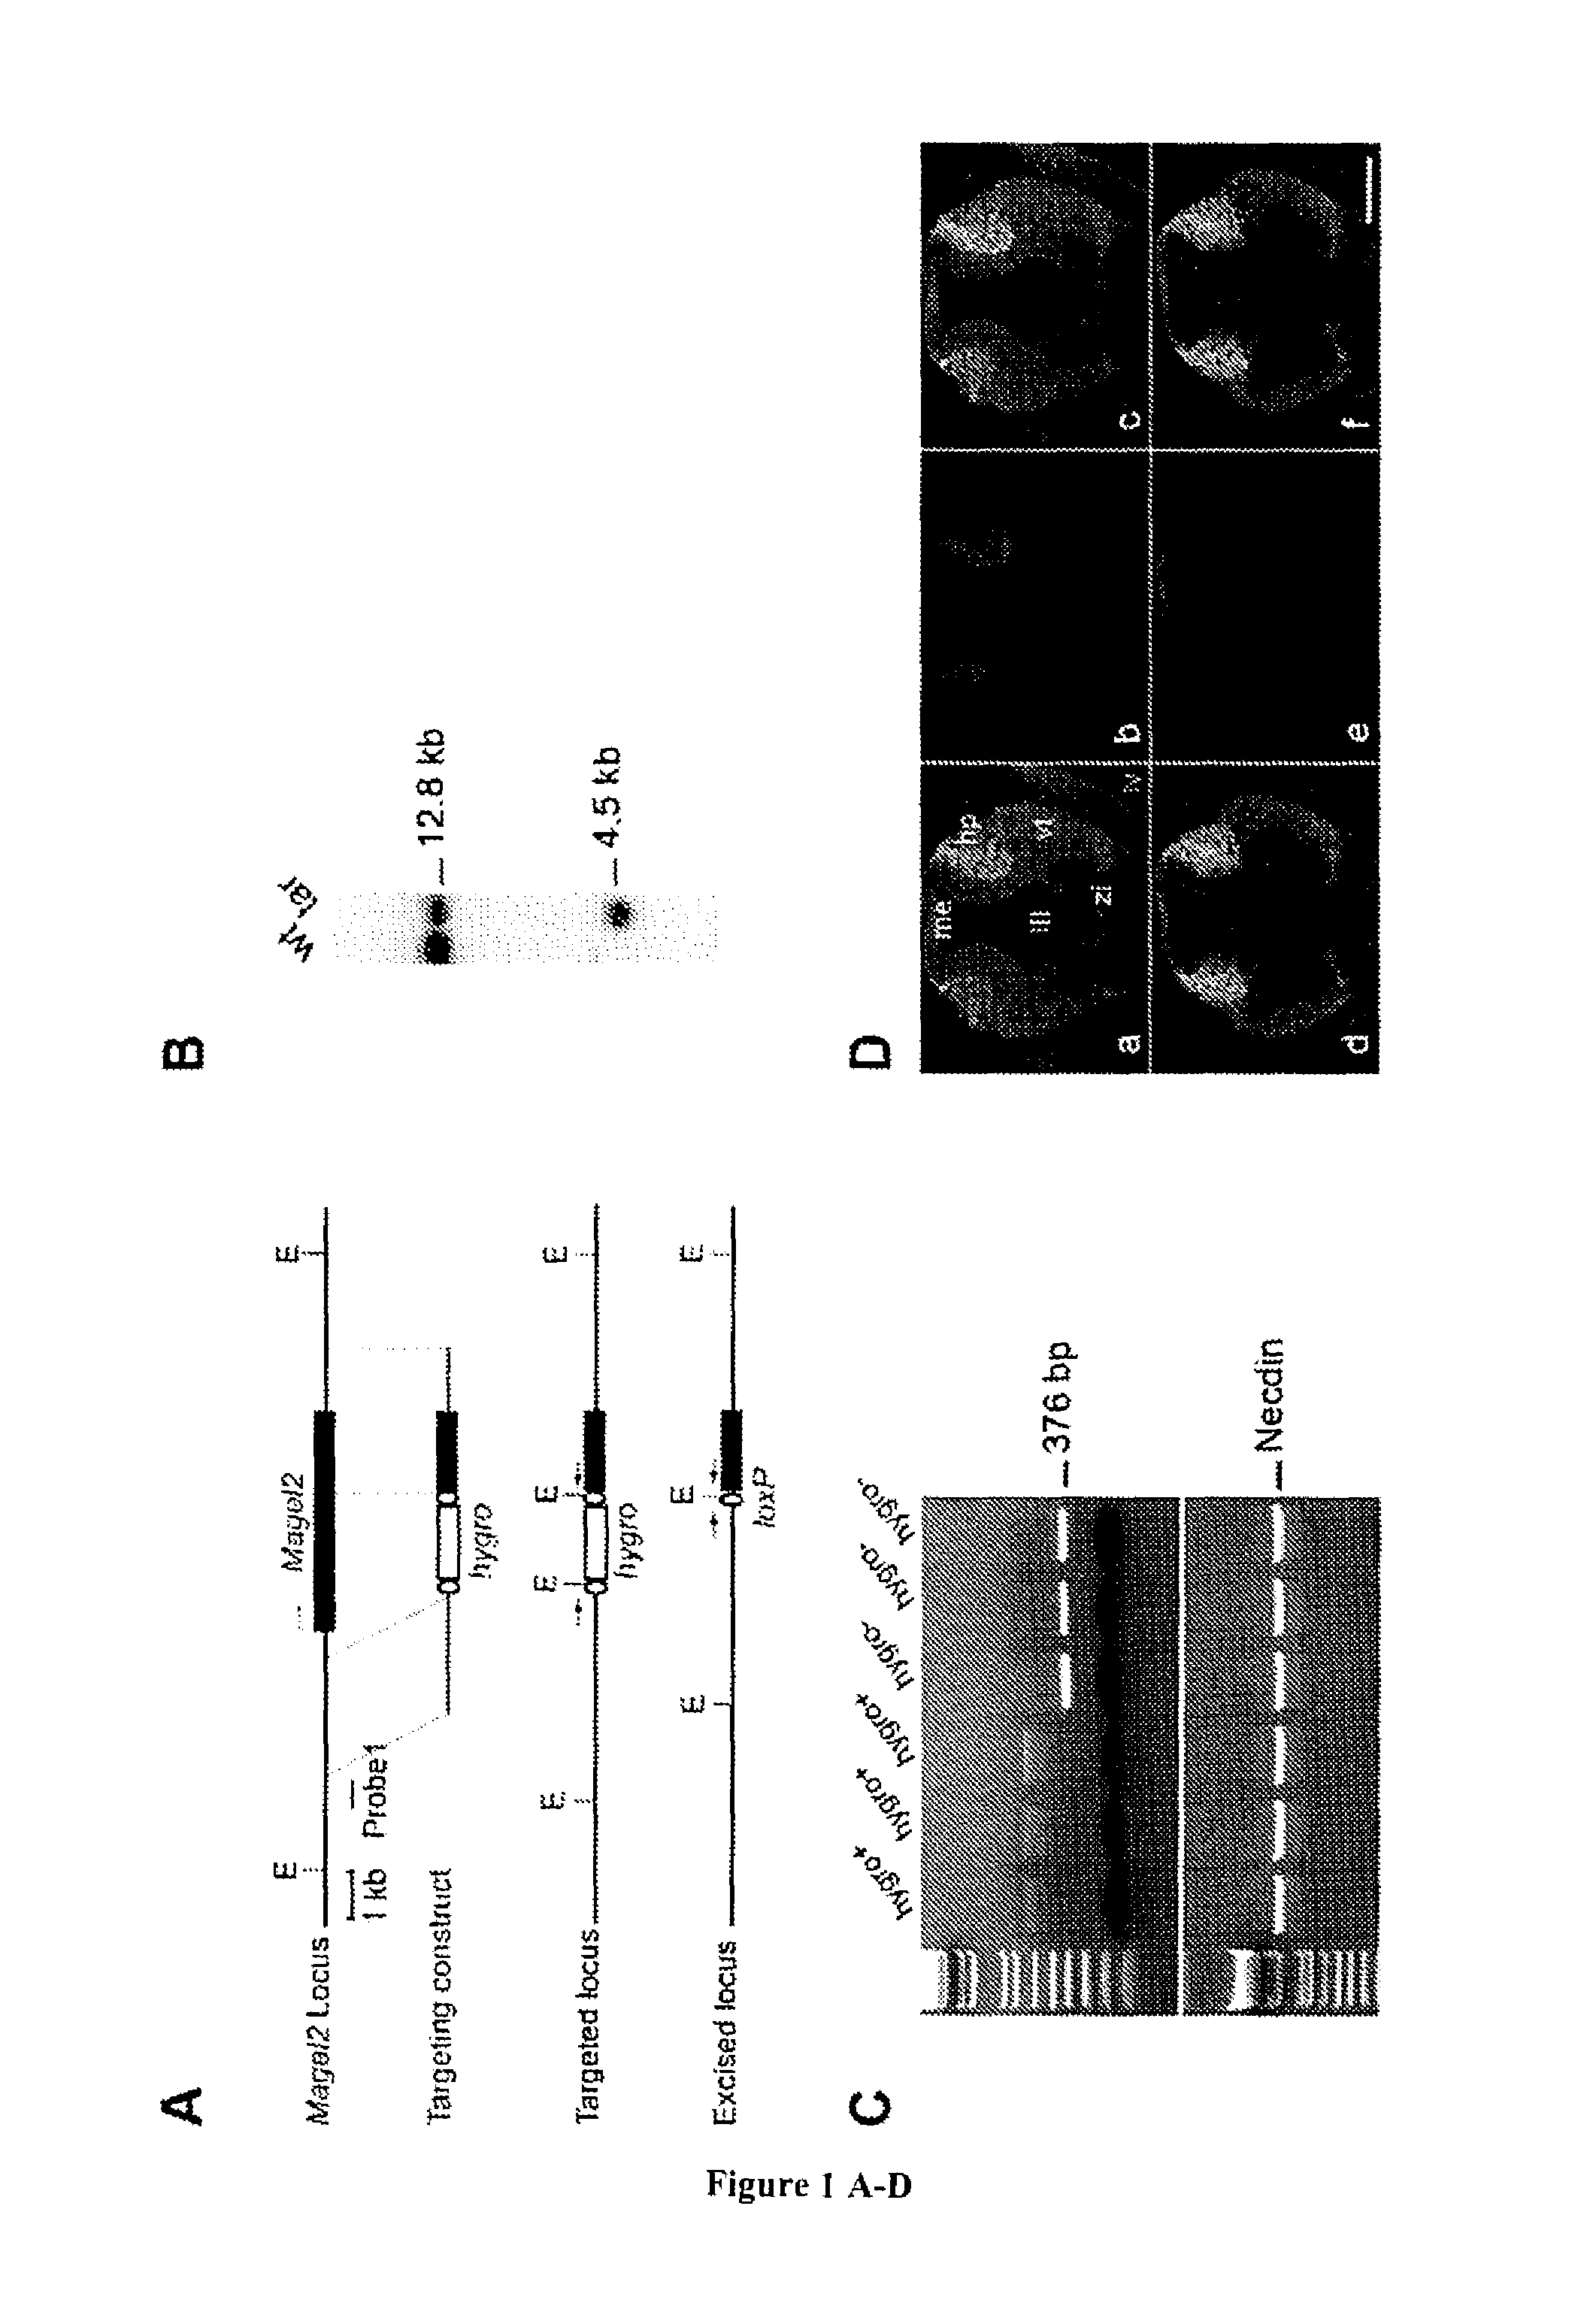 Methods for the treatment of a feeding disorder with onset during neonate development using an agonist of the oxytocin receptor